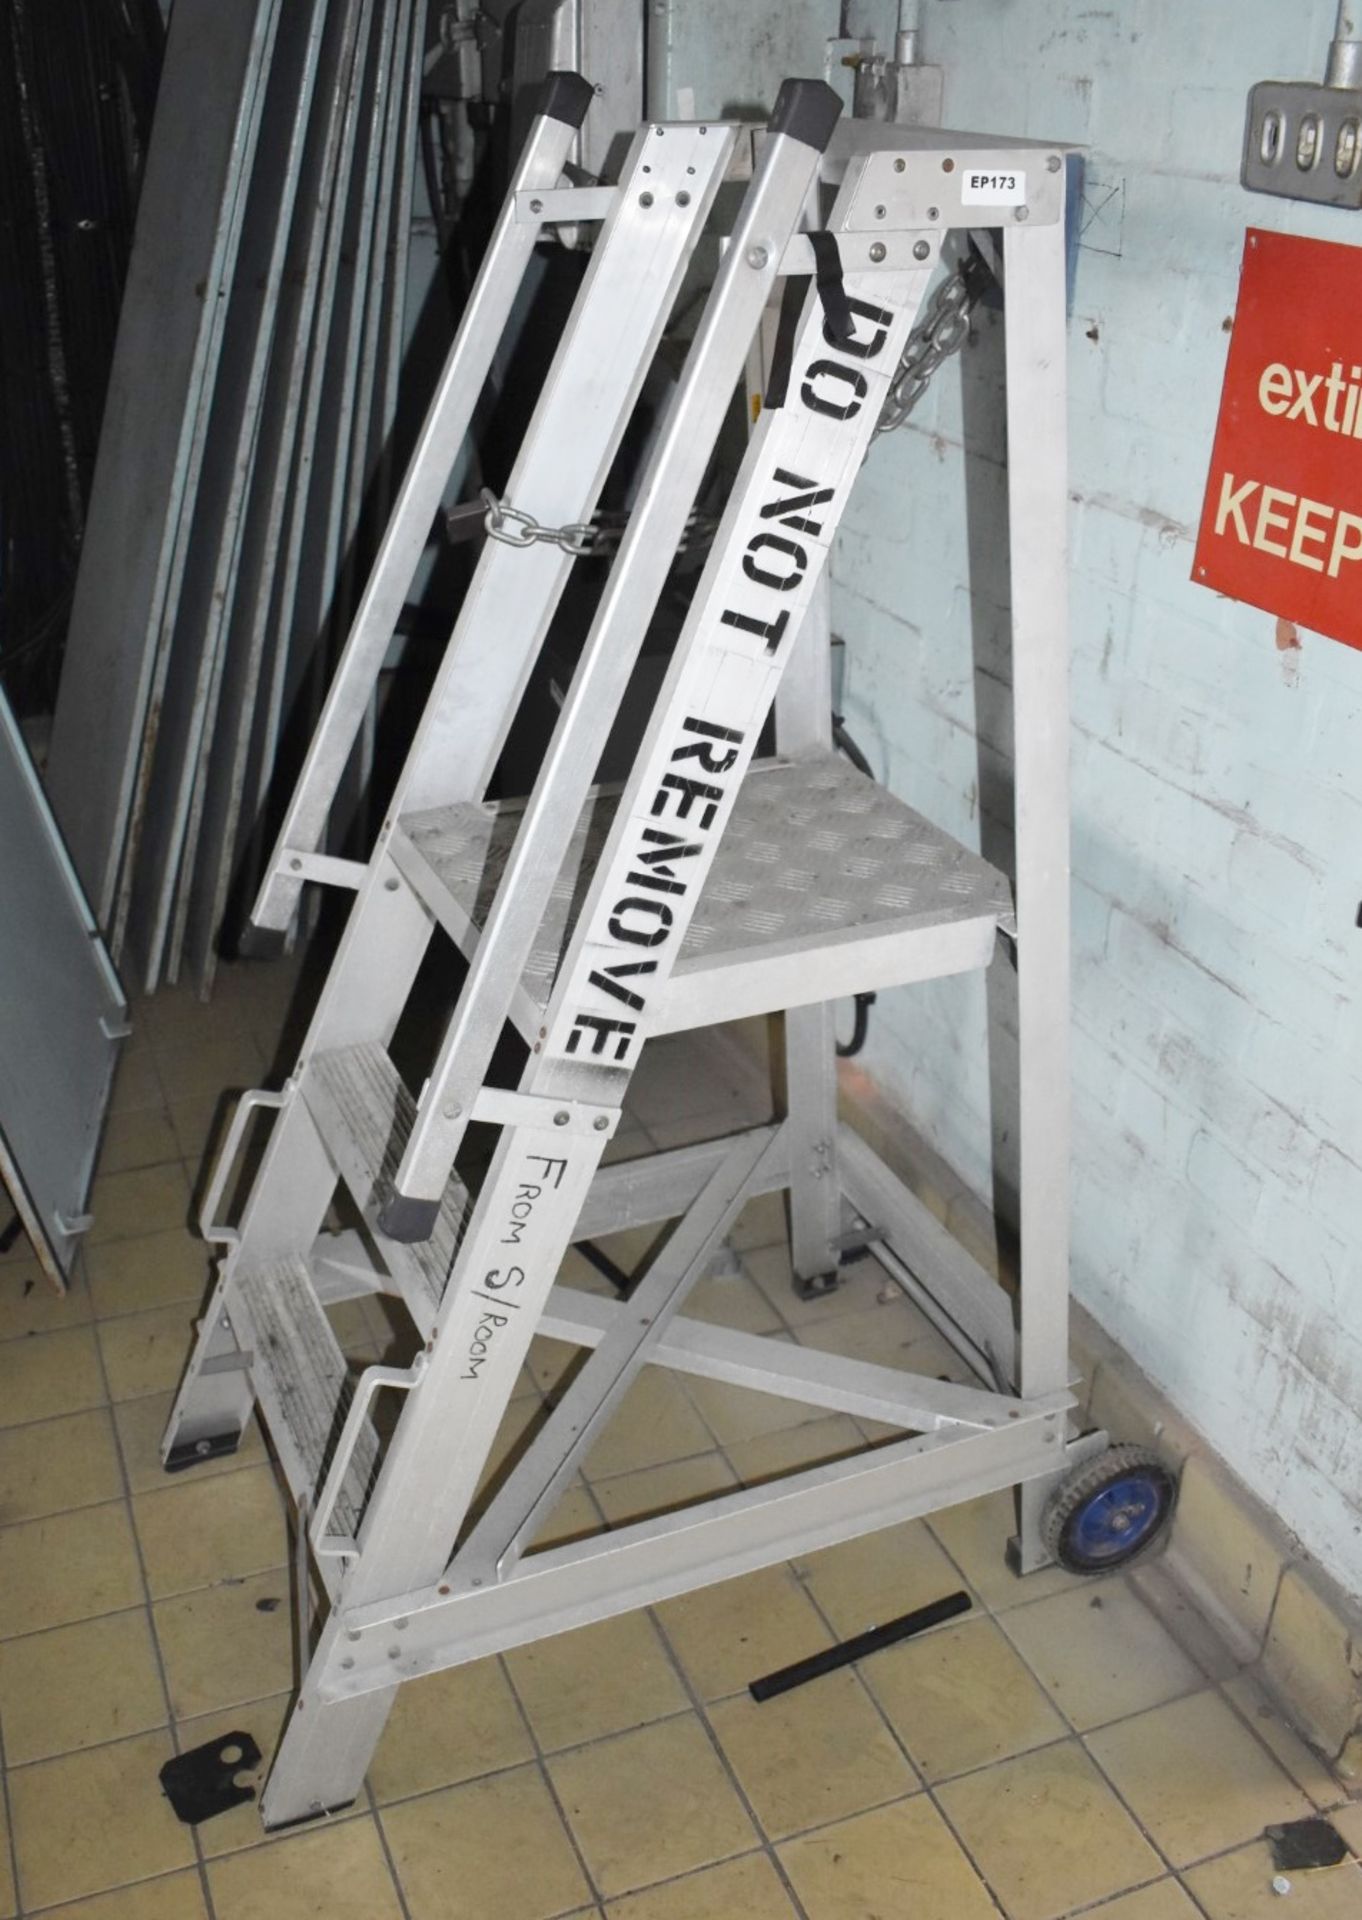 1 x Set of Small Step Ladders With Wheels and Hand Rails - Ref EP173 - CL451 - Location: Scunthorpe,